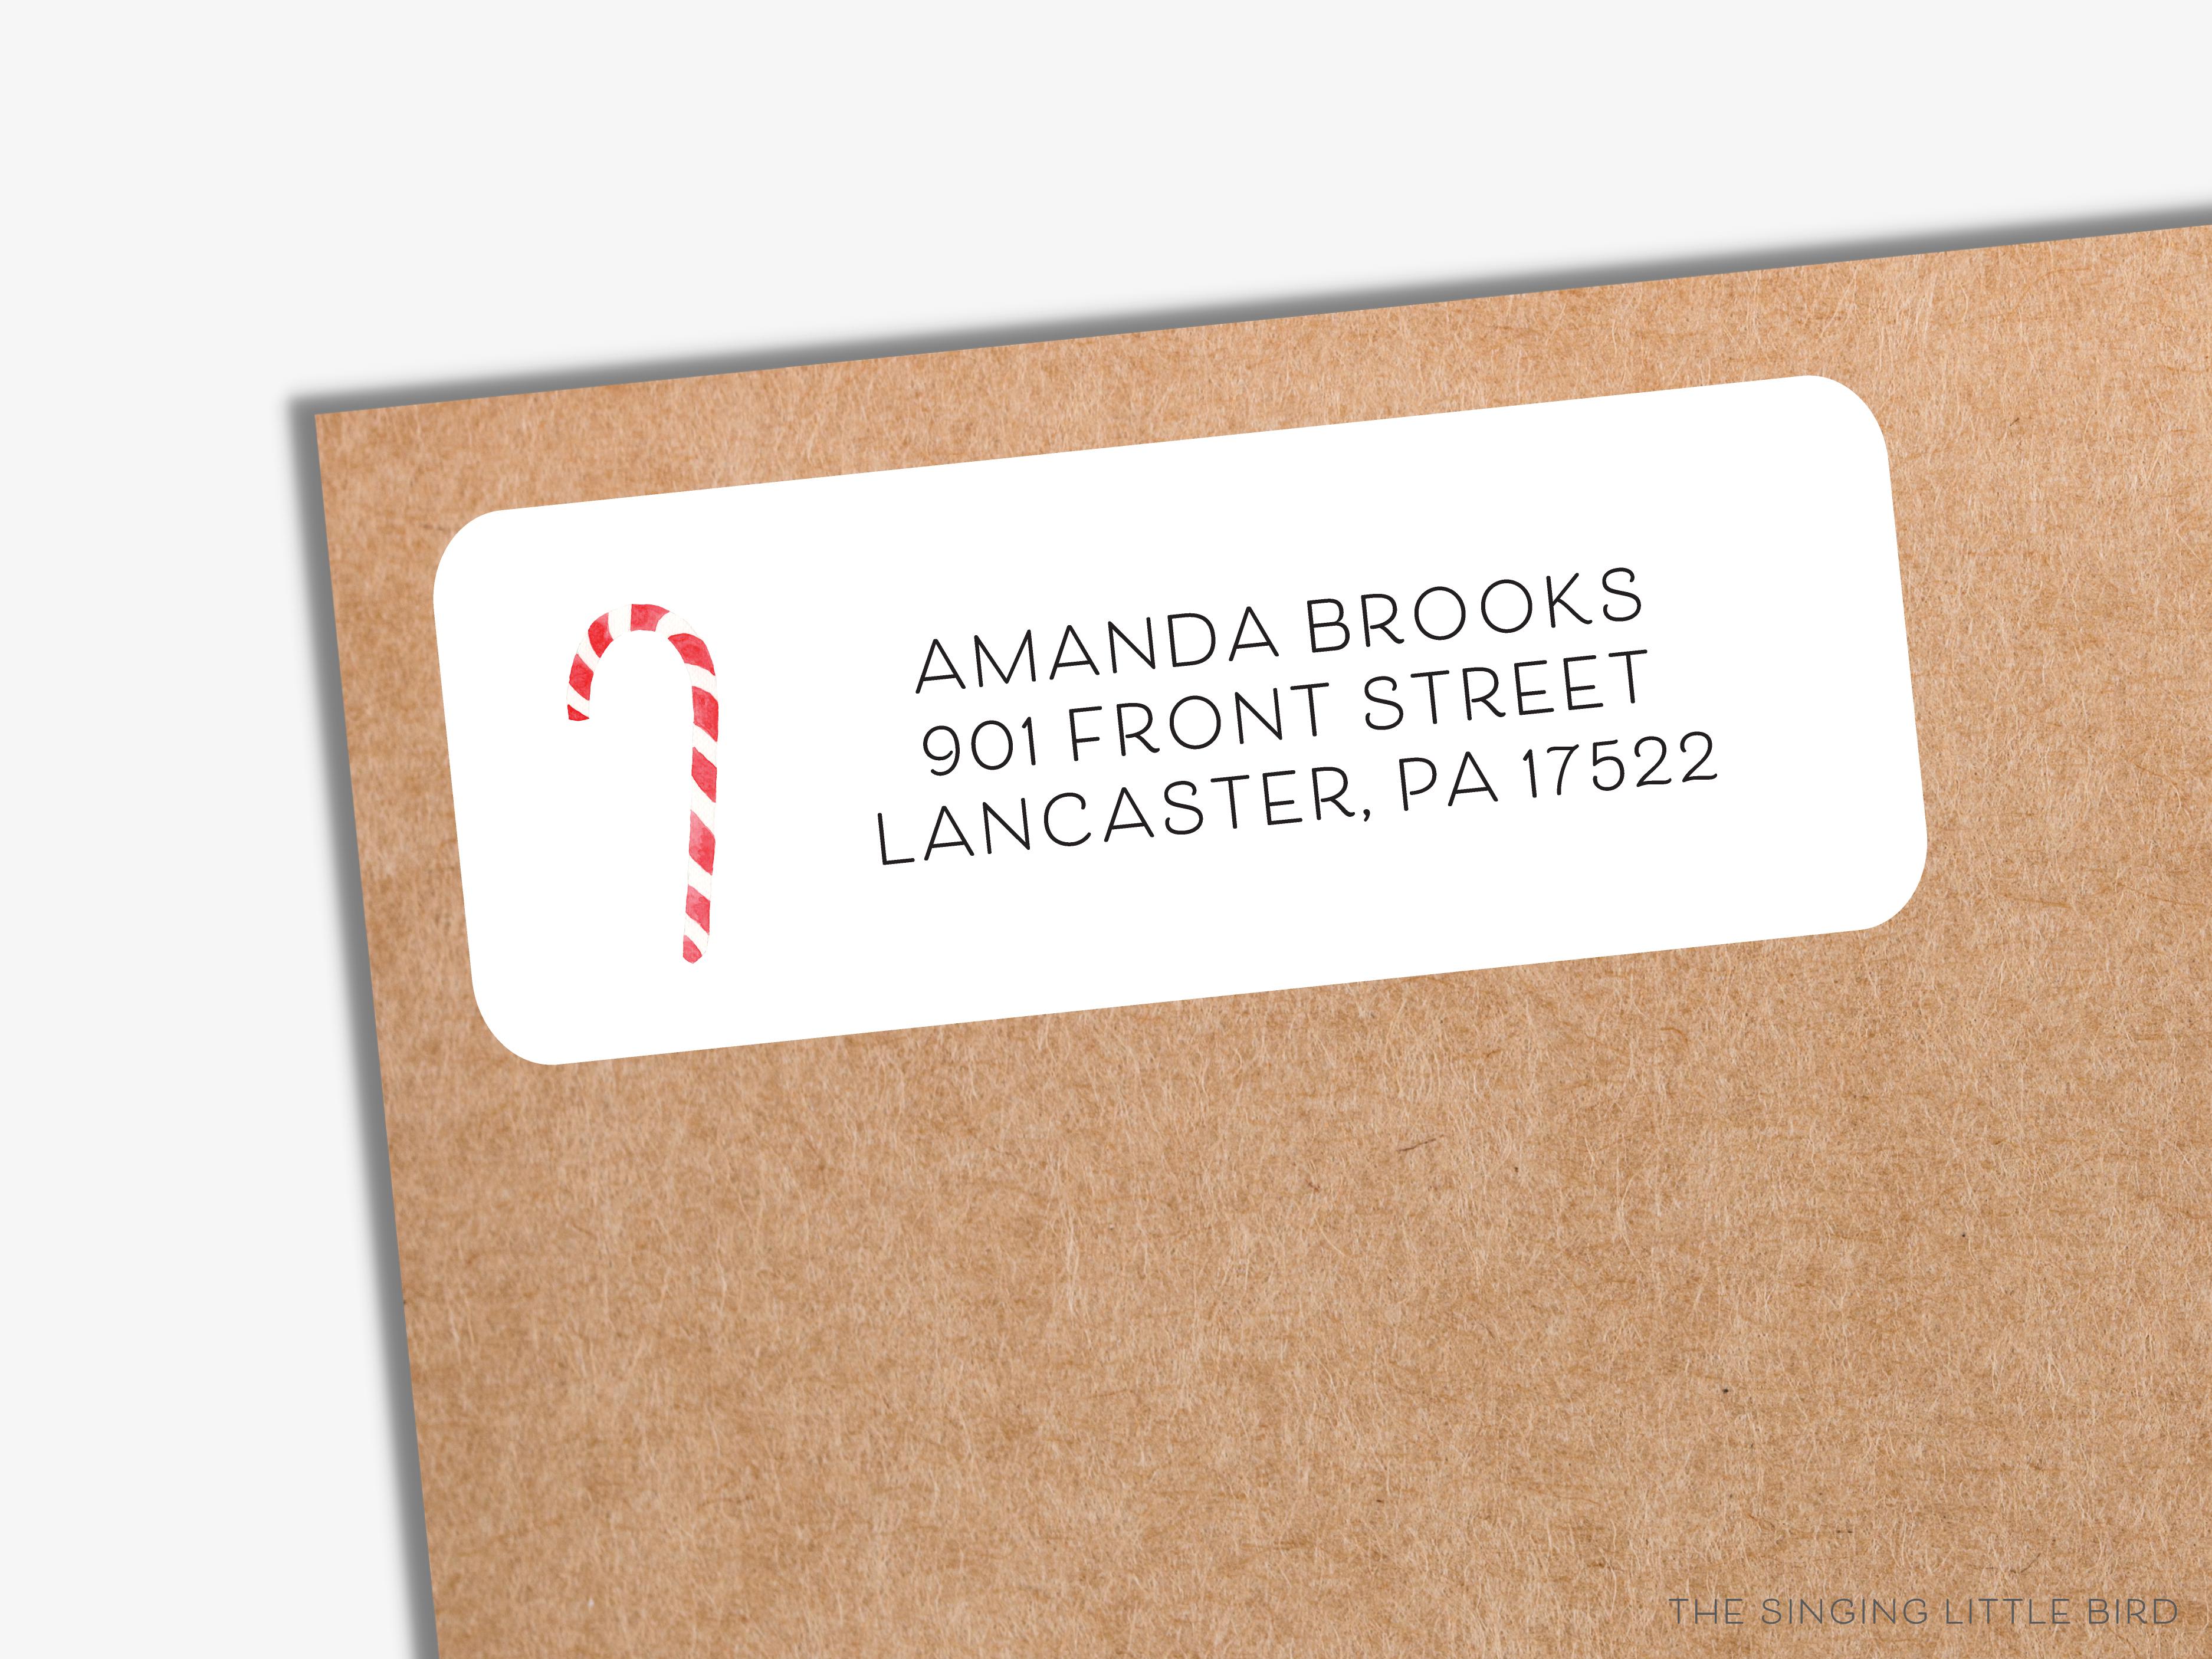 Candy Cane Return Address Labels-These personalized return address labels are 2.625" x 1" and feature our hand-painted watercolor Candy Cane, printed in the USA on beautiful matte finish labels. These make great gifts for yourself or the peppermint lover.-The Singing Little Bird